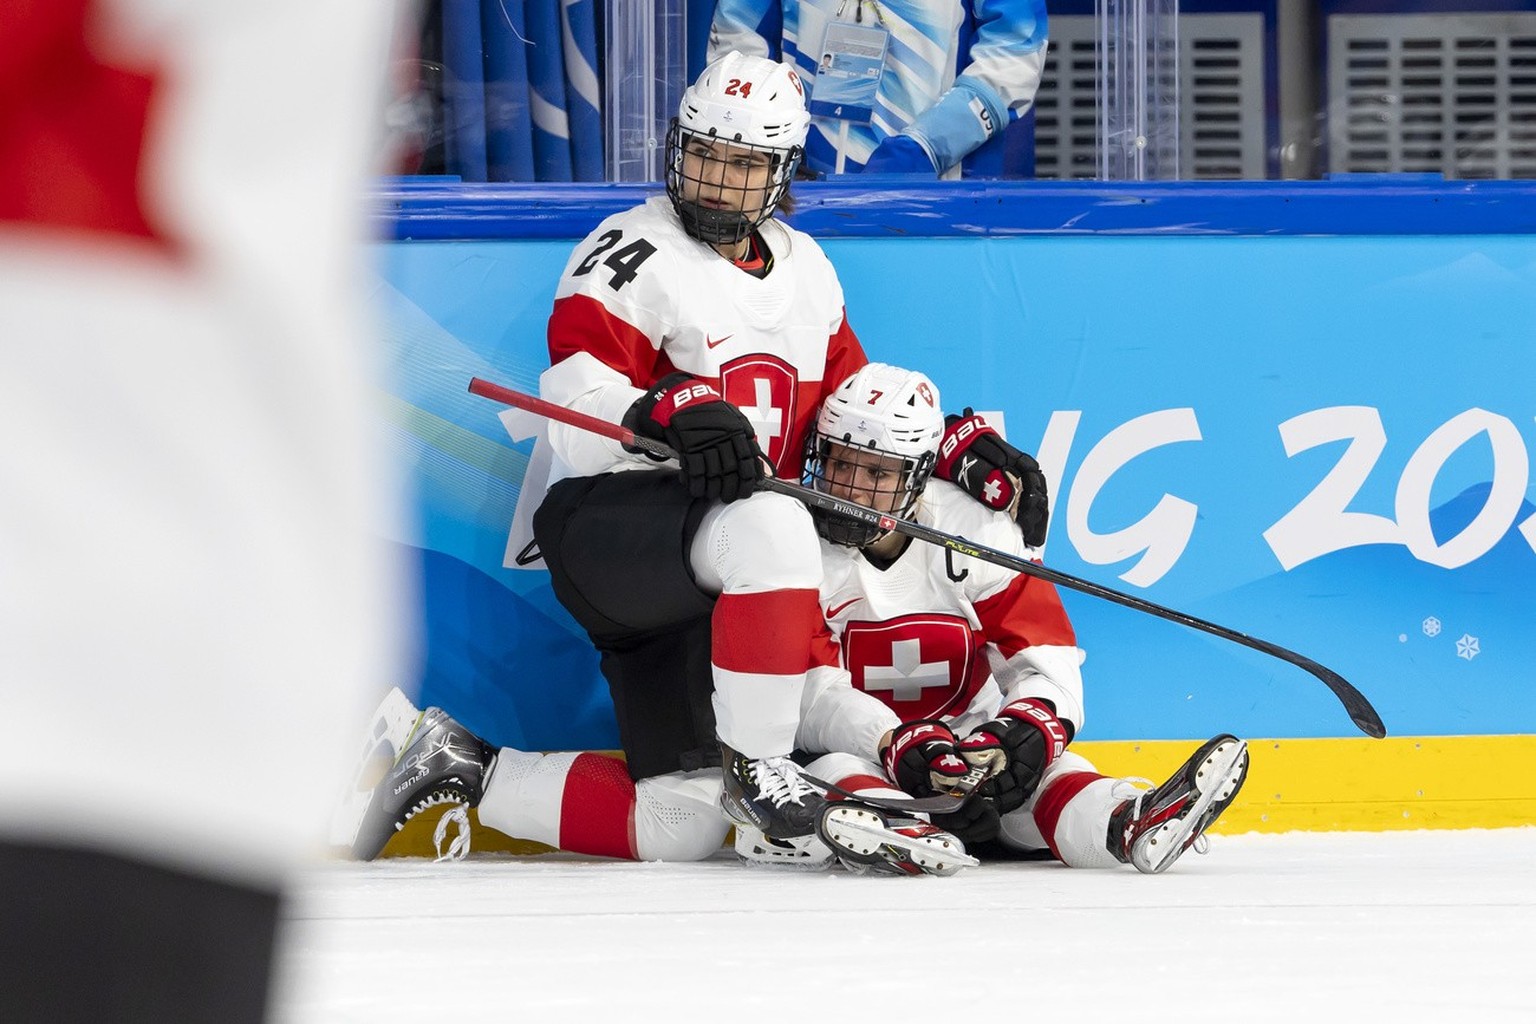 Switzerland&#039;s forward Lara Stalder, right, is comforted by Switzerland&#039;s forward Noemi Ryhner, left, after losing the women&#039;s ice hockey Bronze Medal game between Finland and Switzerlan ...